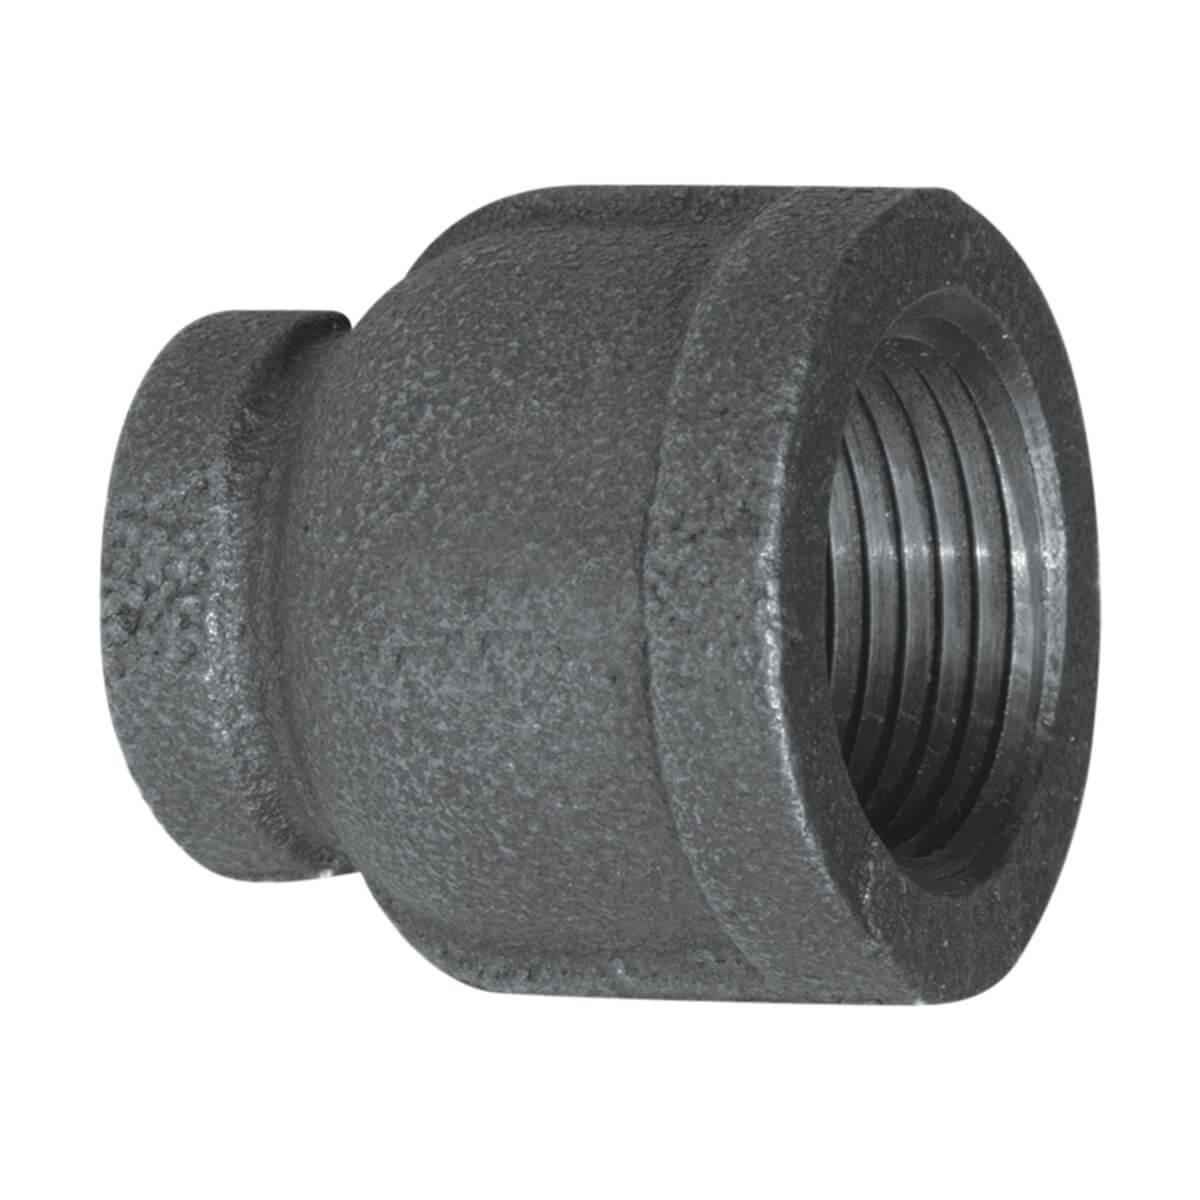 Fitting Black Iron Reducer Coupling - 1-in x 3/4-in